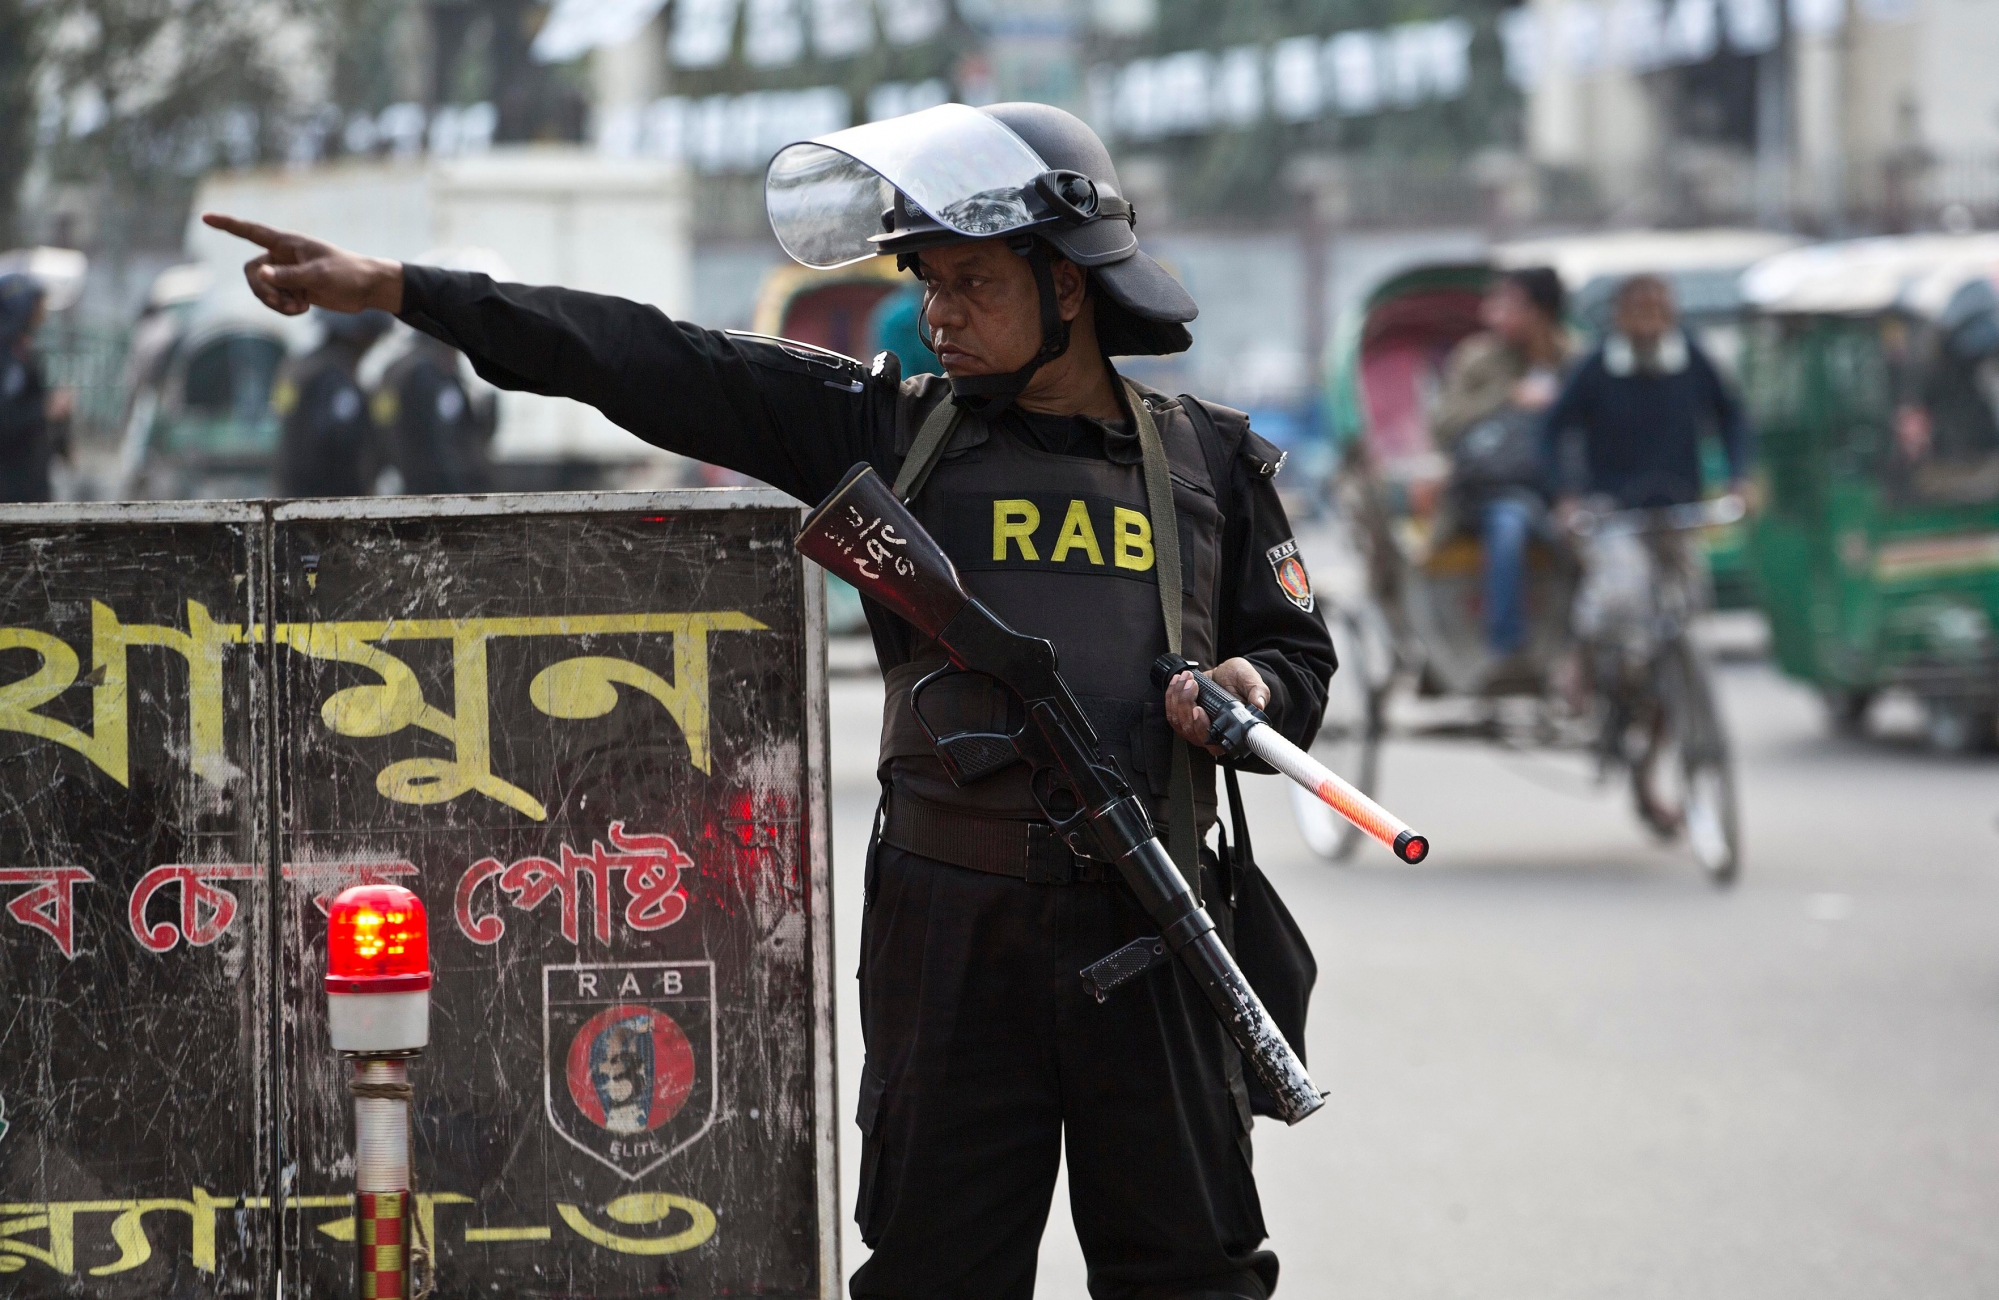 Bangladesh police's elite Rapid Action Battalion (RAB) personal gestures towards a vehicle to stop for checking ahead of the general elections in Dhaka, Bangladesh, Friday, Dec. 28, 2018. Bangladesh Prime Minister Sheikh Hasina is poised to win a record fourth term in Sunday's elections, drumming up support by promising a development bonanza as her critics question if the South Asian nation's tremendous economic success has come at the expense of its already fragile democracy. (AP Photo/Anupam Nath) Bangladesh Elections